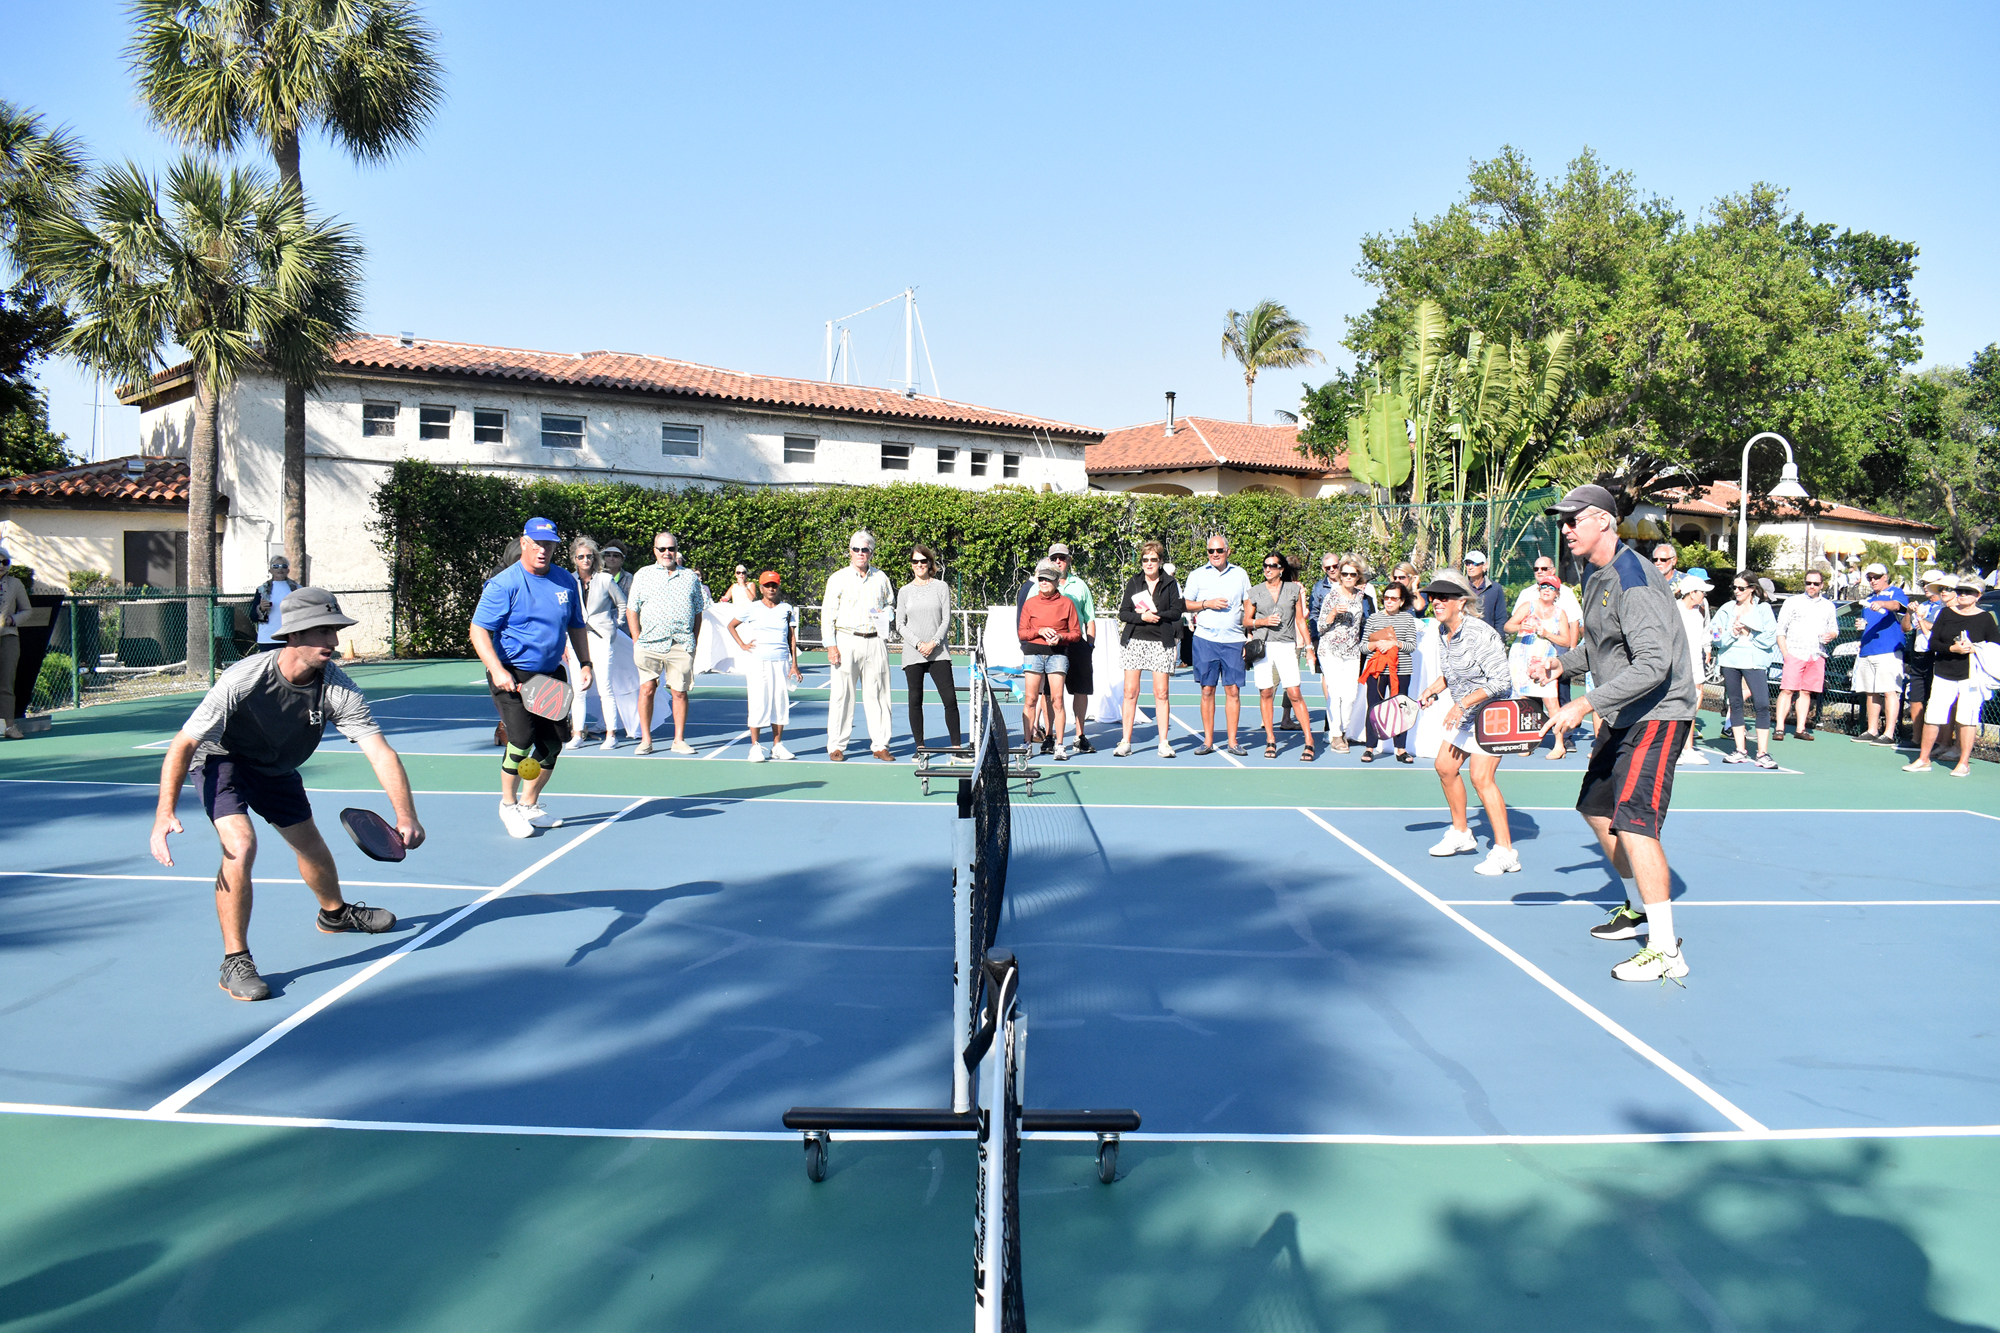 The pickleball courts will be open to club members who can sign up for court times in the marina.